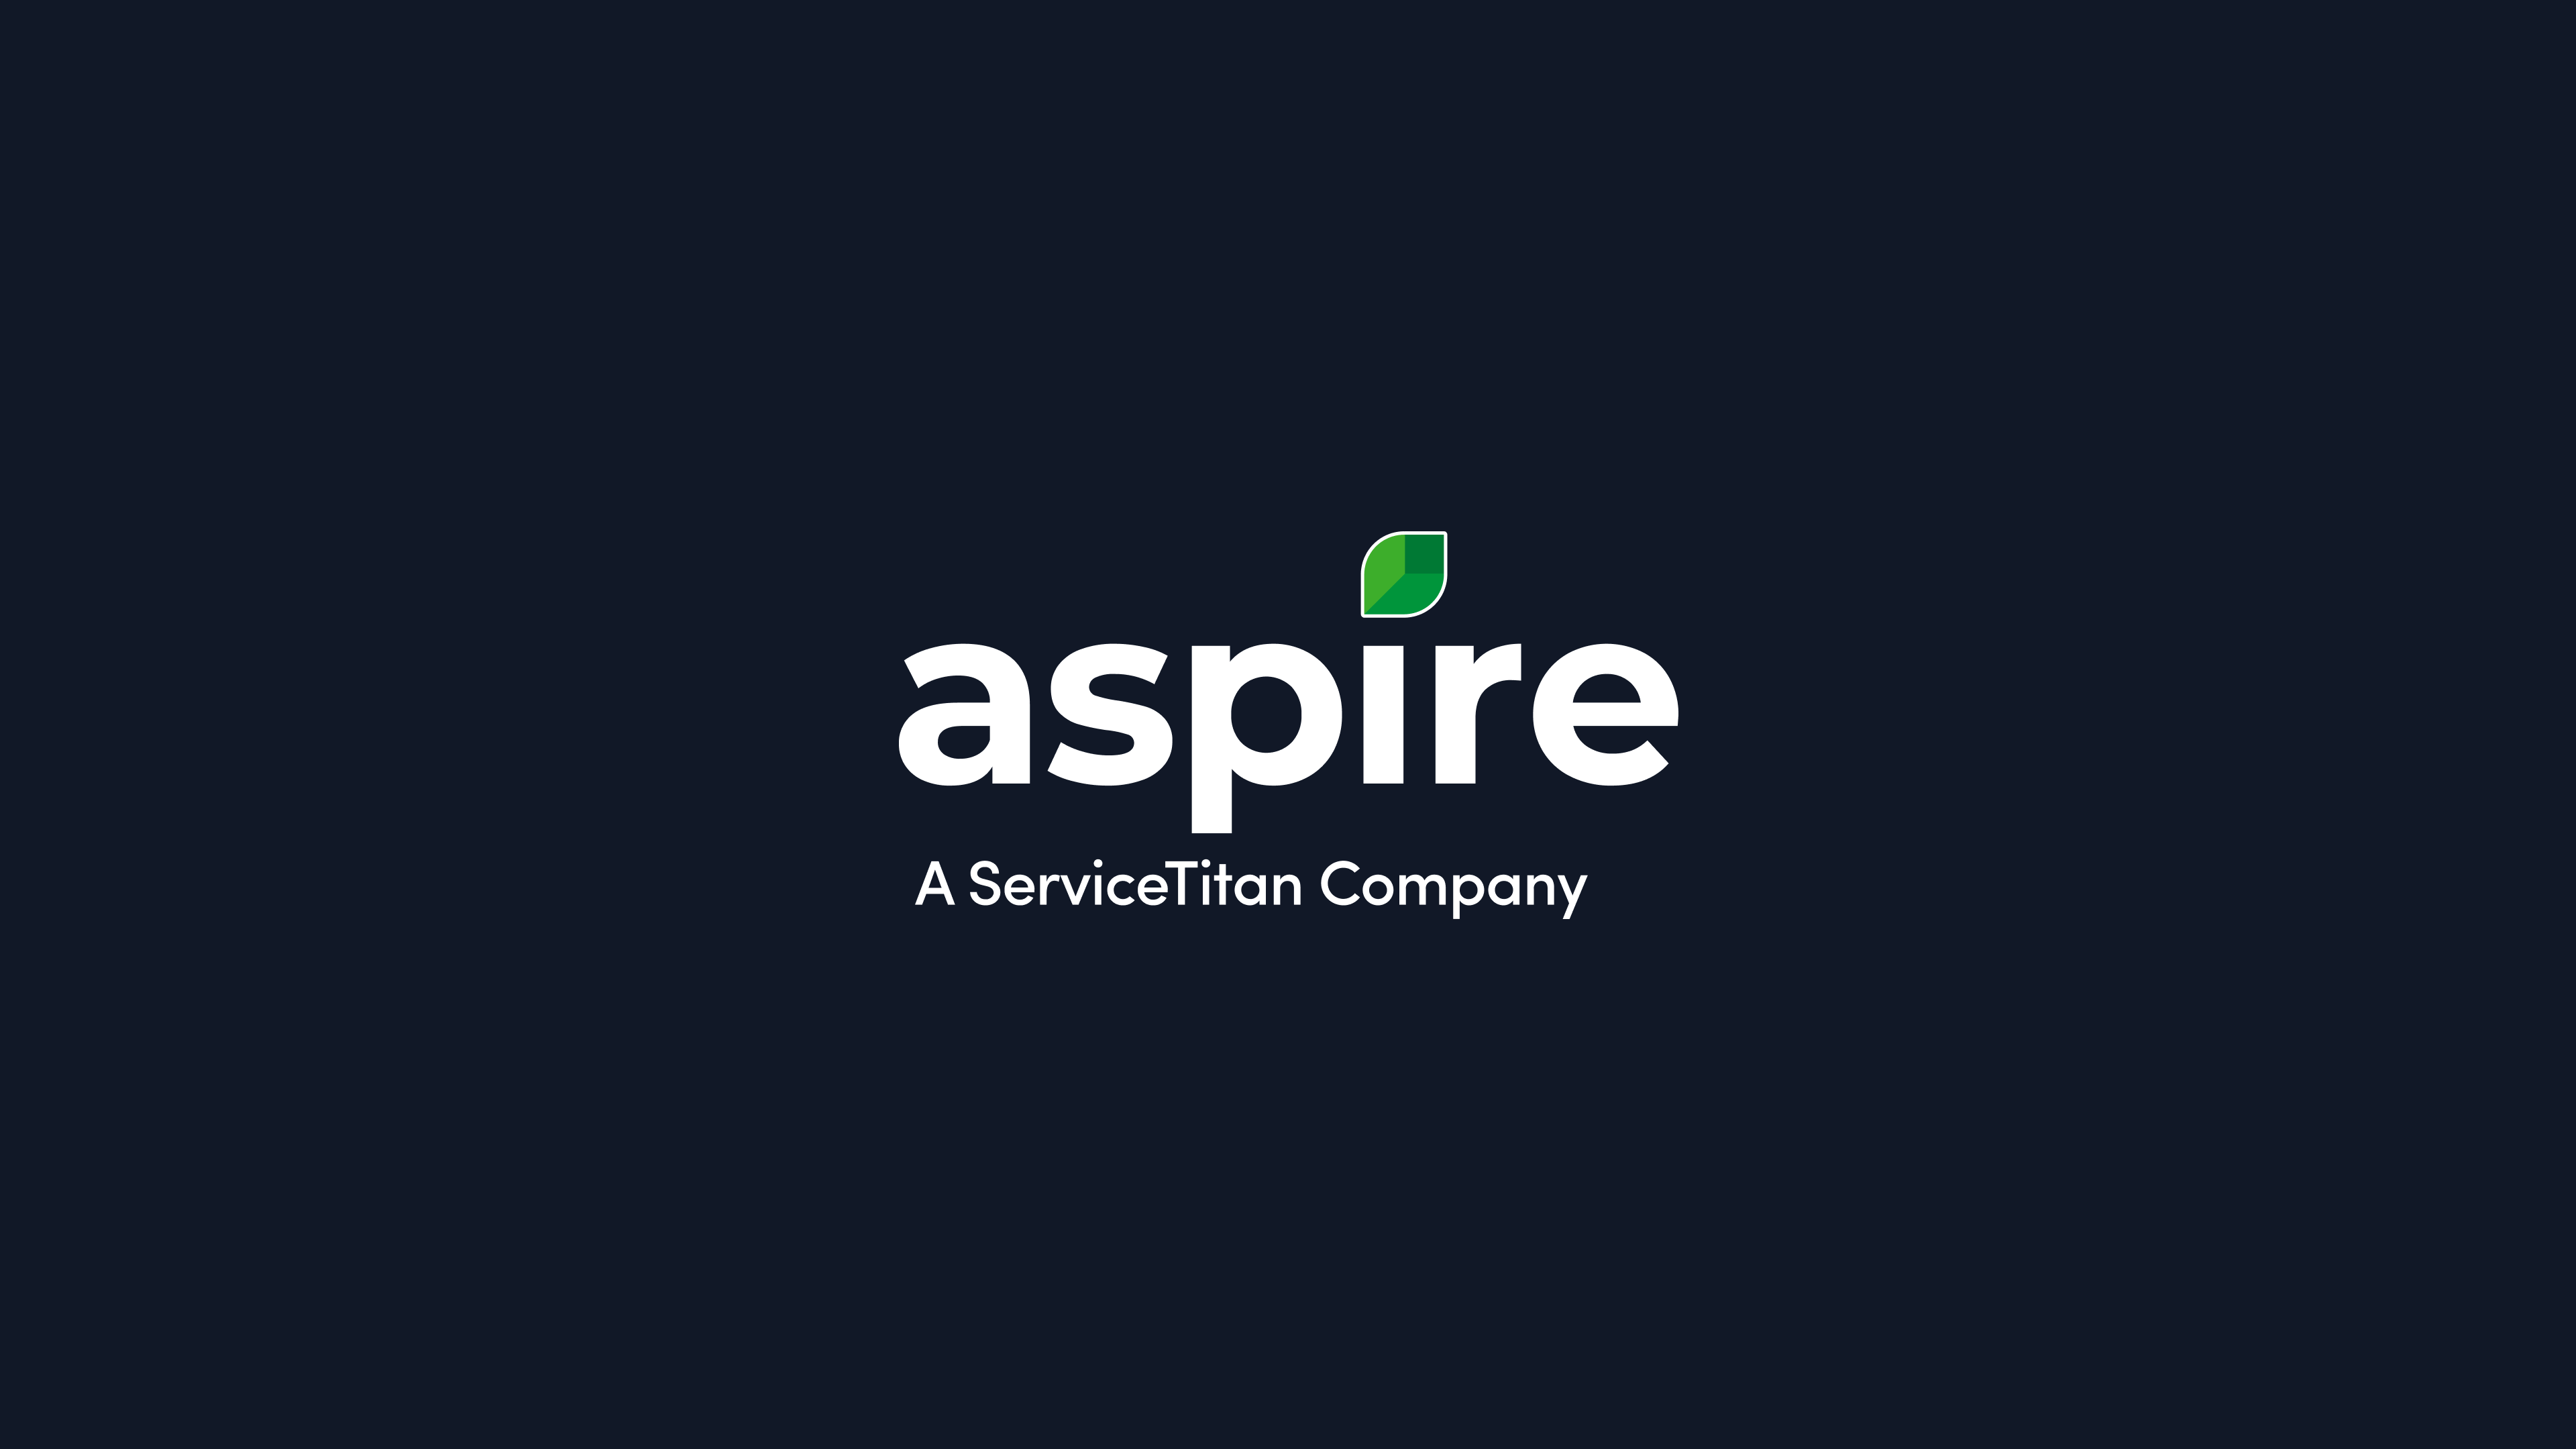 Aspire Software's take on the current COVID-19 business environment